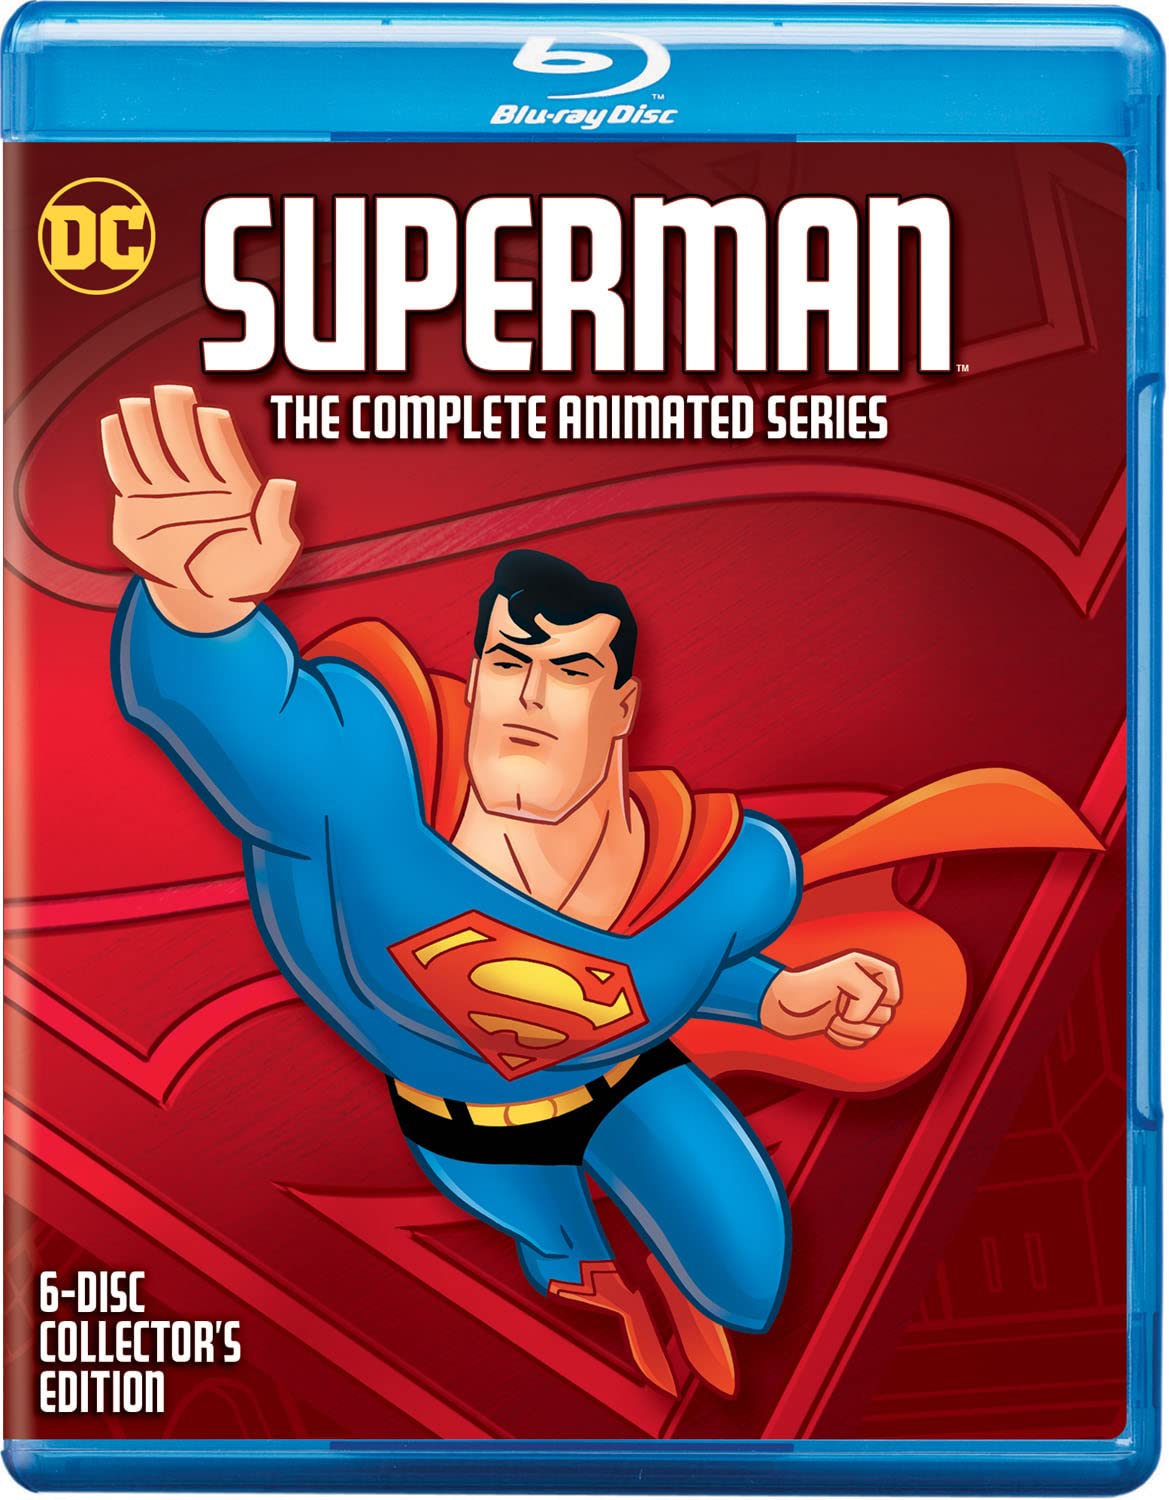 Superman: The Complete Animated Series (Blu-ray) $19.49 + Free Shipping w/ Prime or $35+